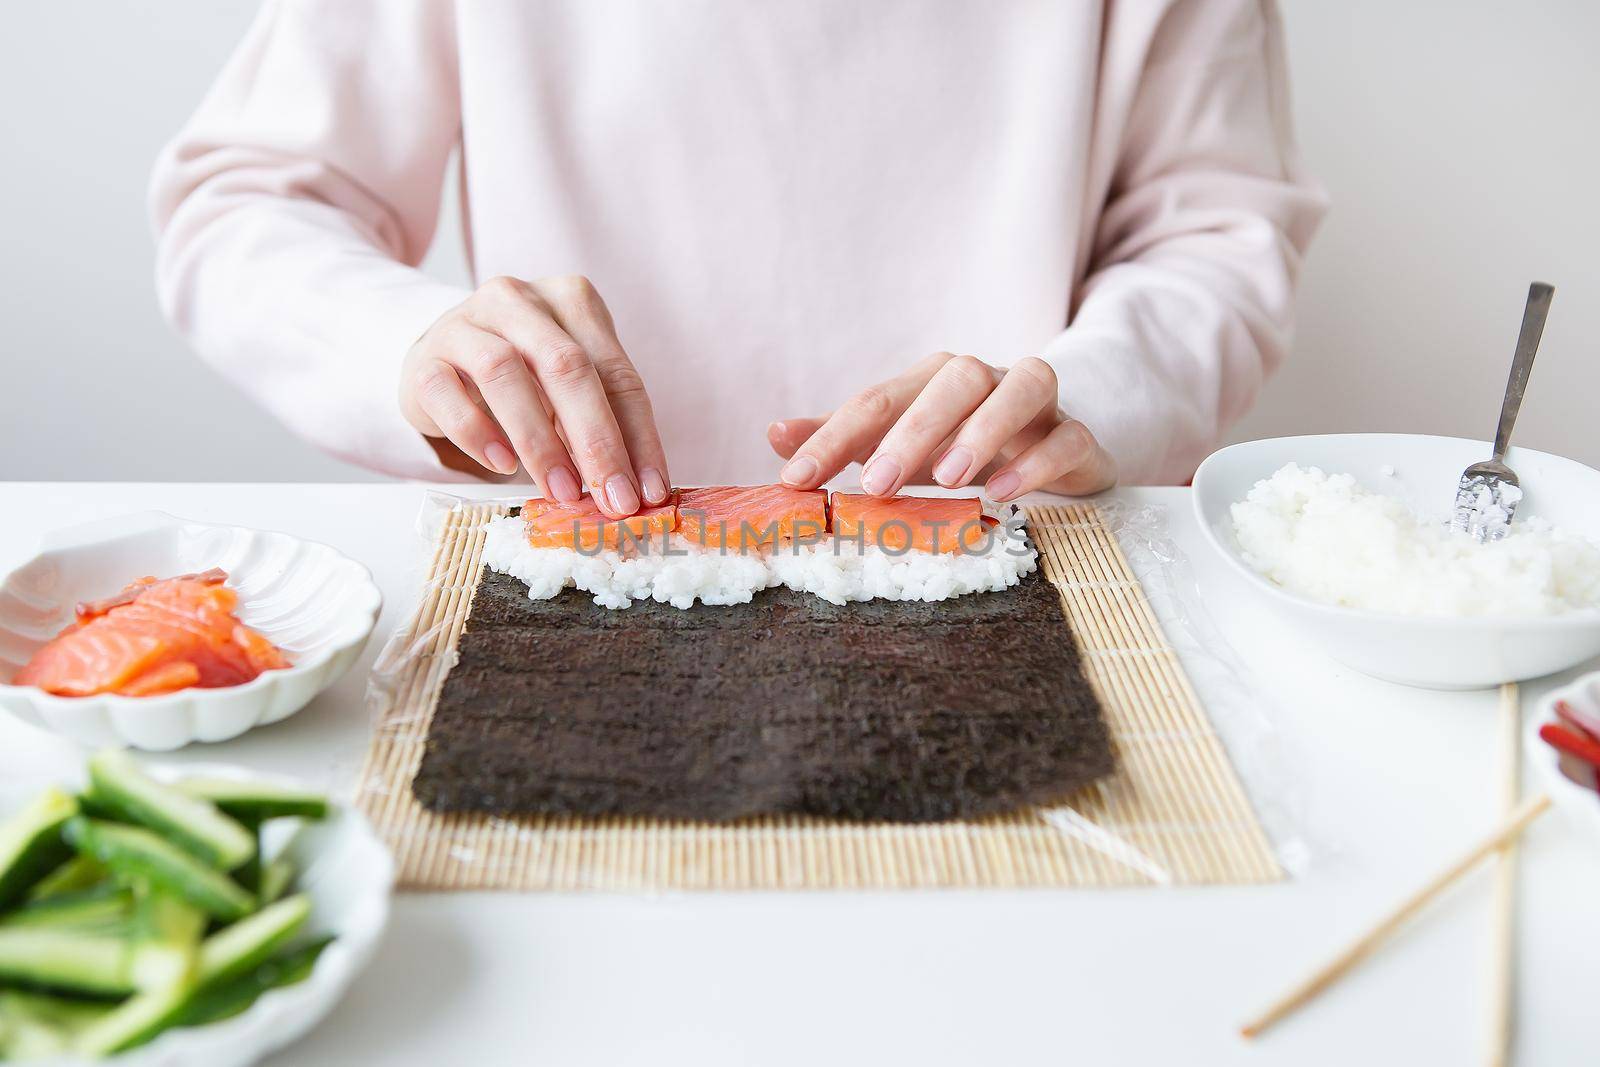 Sushi preparation process, the girl makes sushi with different flavors - fresh salmon, caviar, avocado, cucumber, ginger, rice. by sfinks